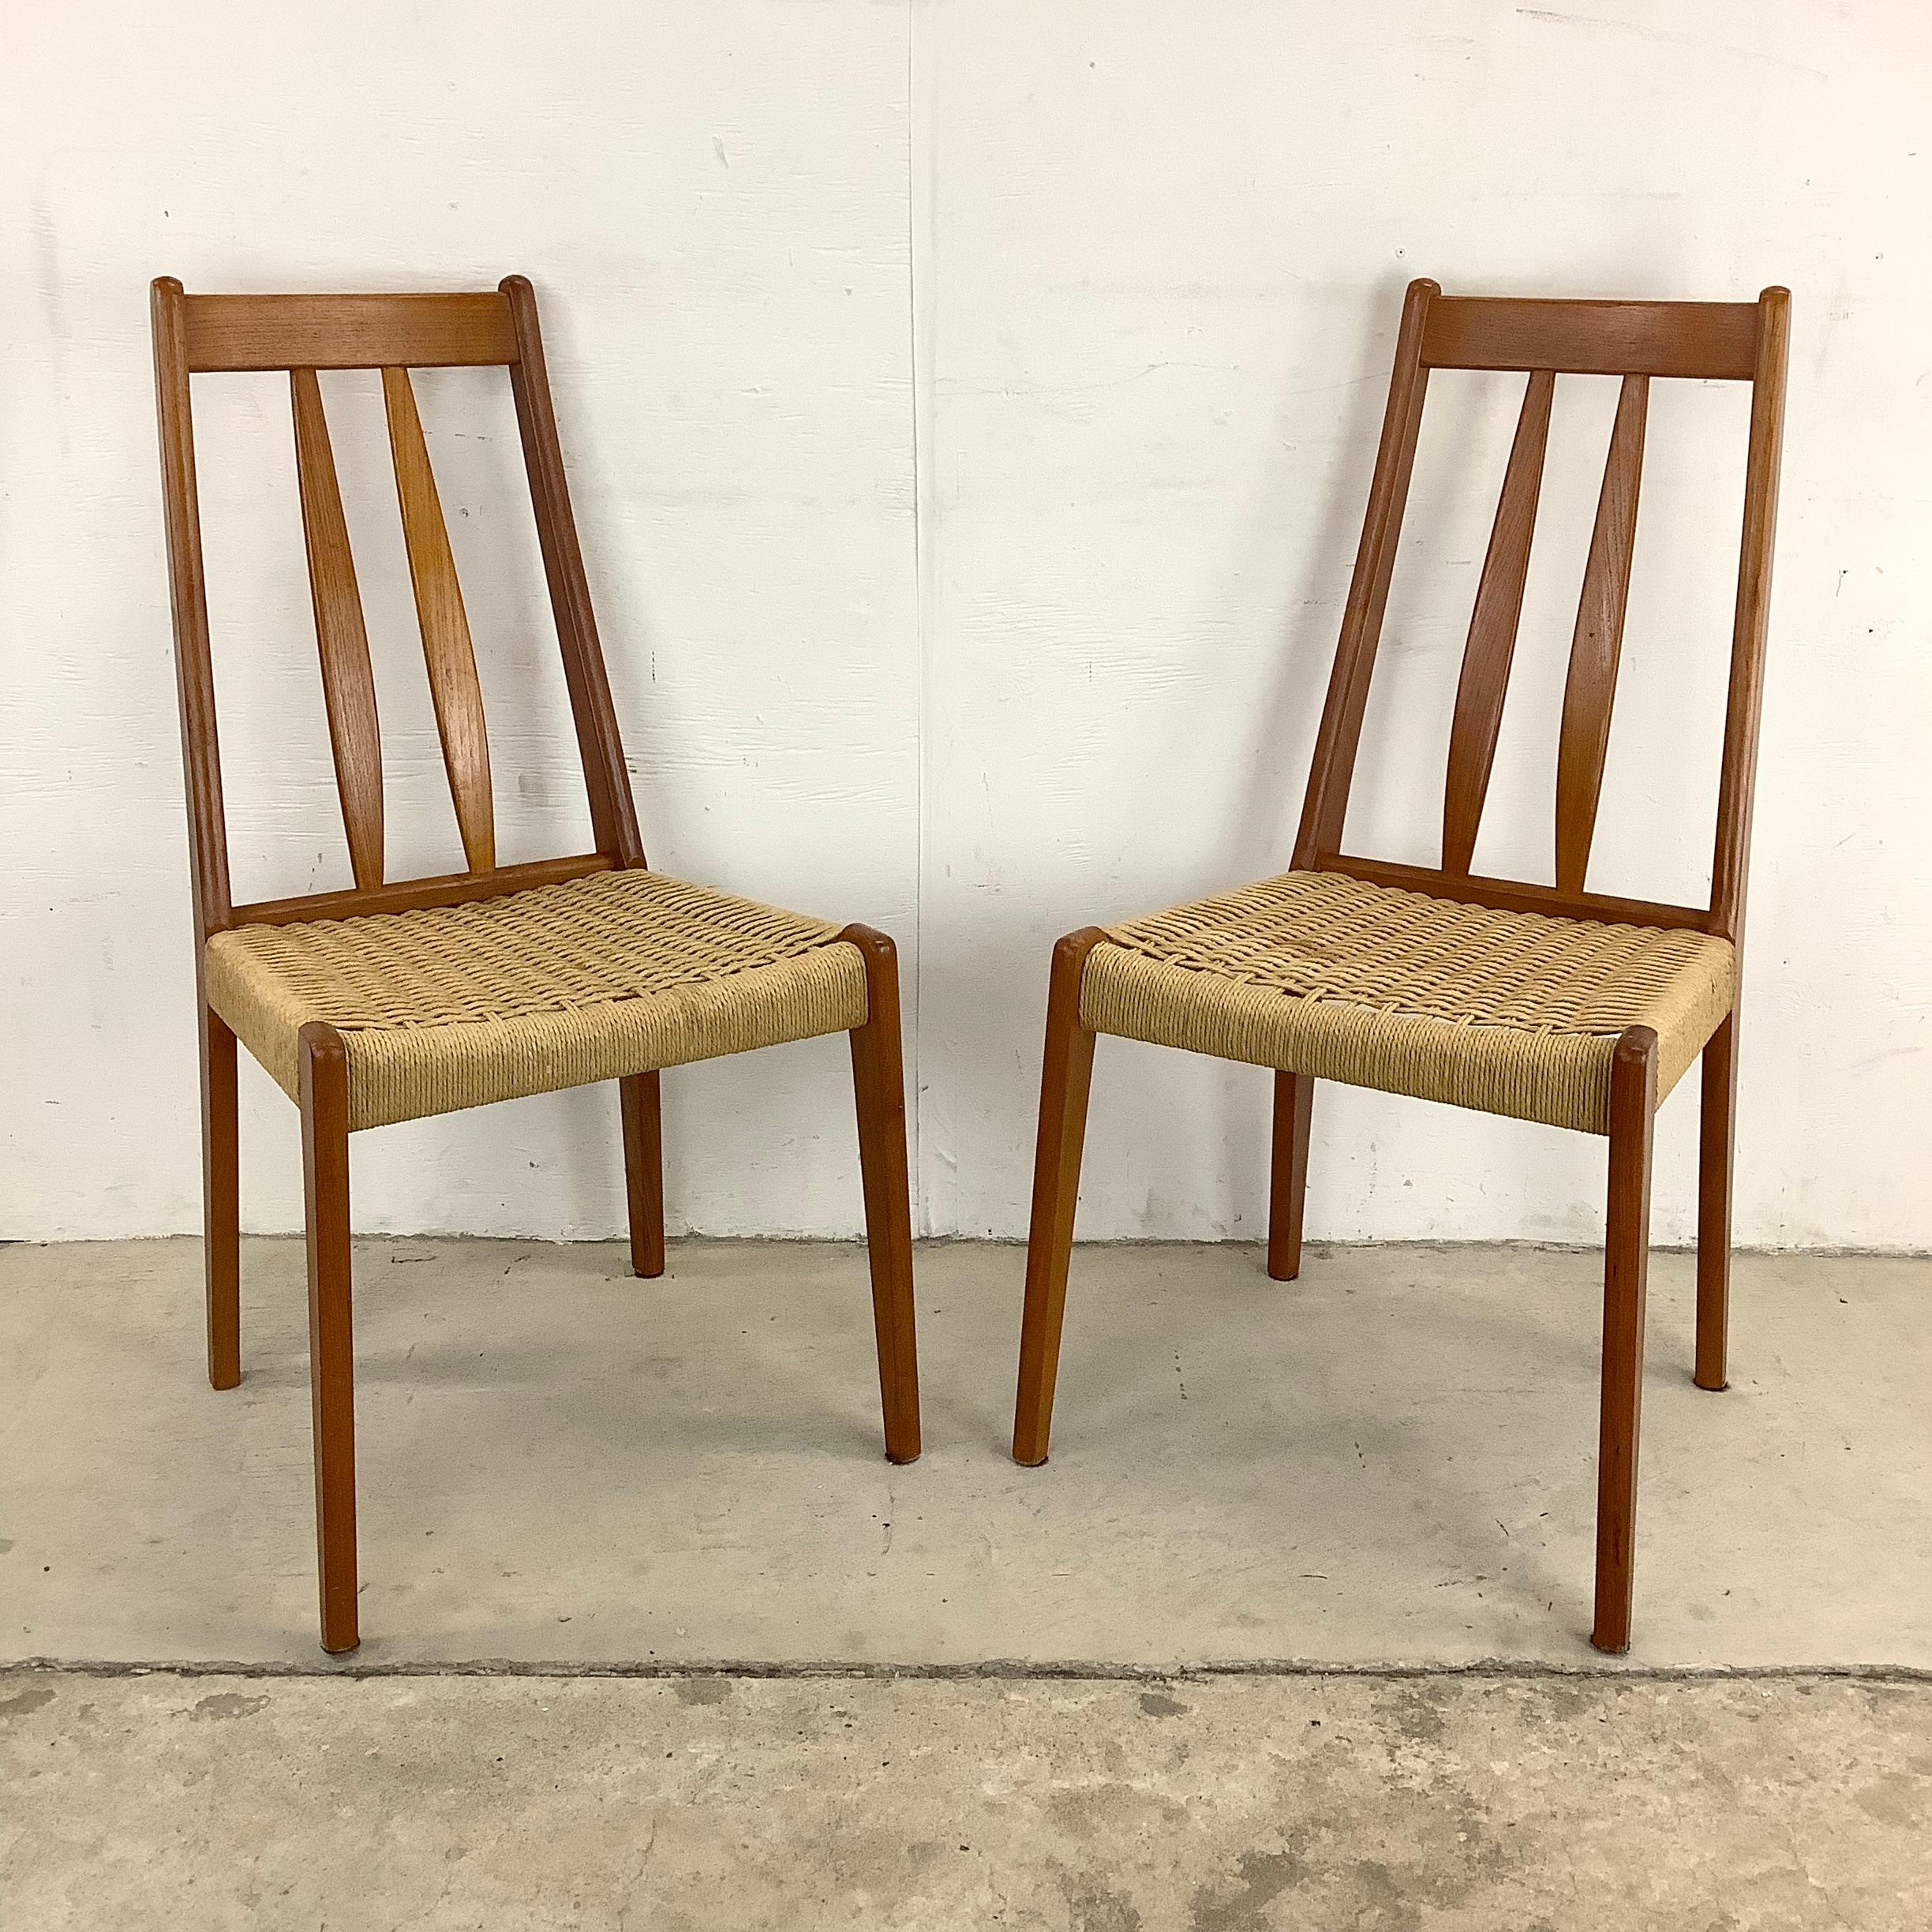 This stylish pair of Scandinavian Modern teak dining chairs feature sculptural teak construction with vintage rope cord seats. The distinctive style of this matching pair of mid-century chairs makes for a striking addition to any interior seating